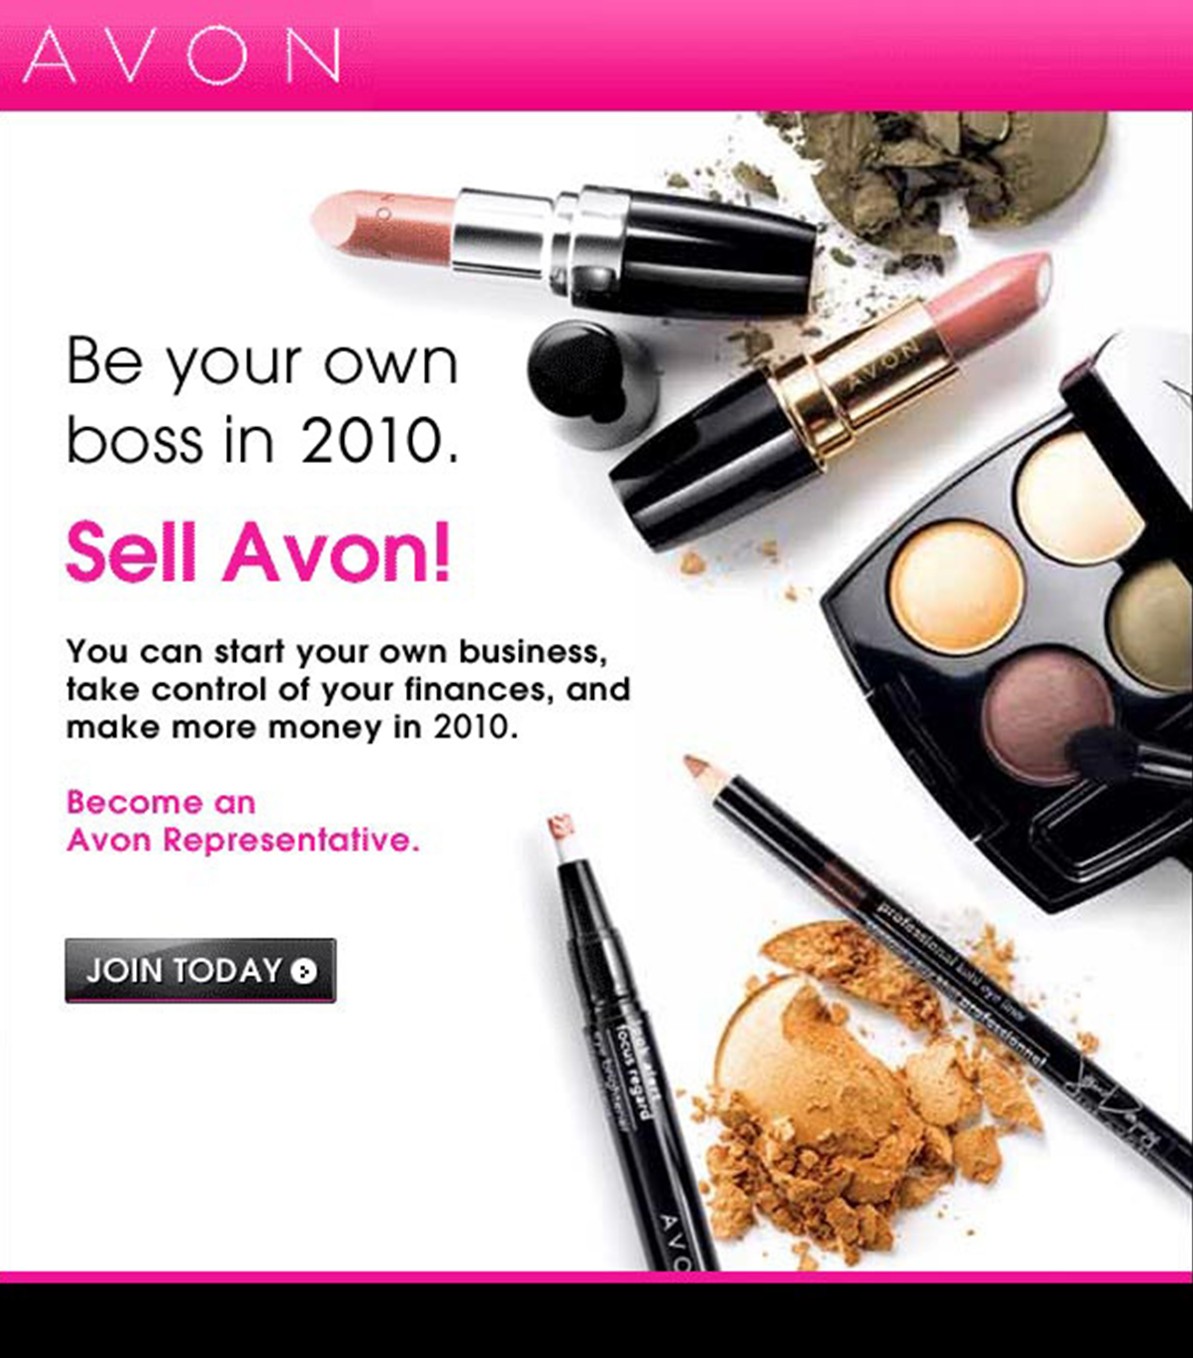 AVONbysspegs: Start Your own AVON business today!!